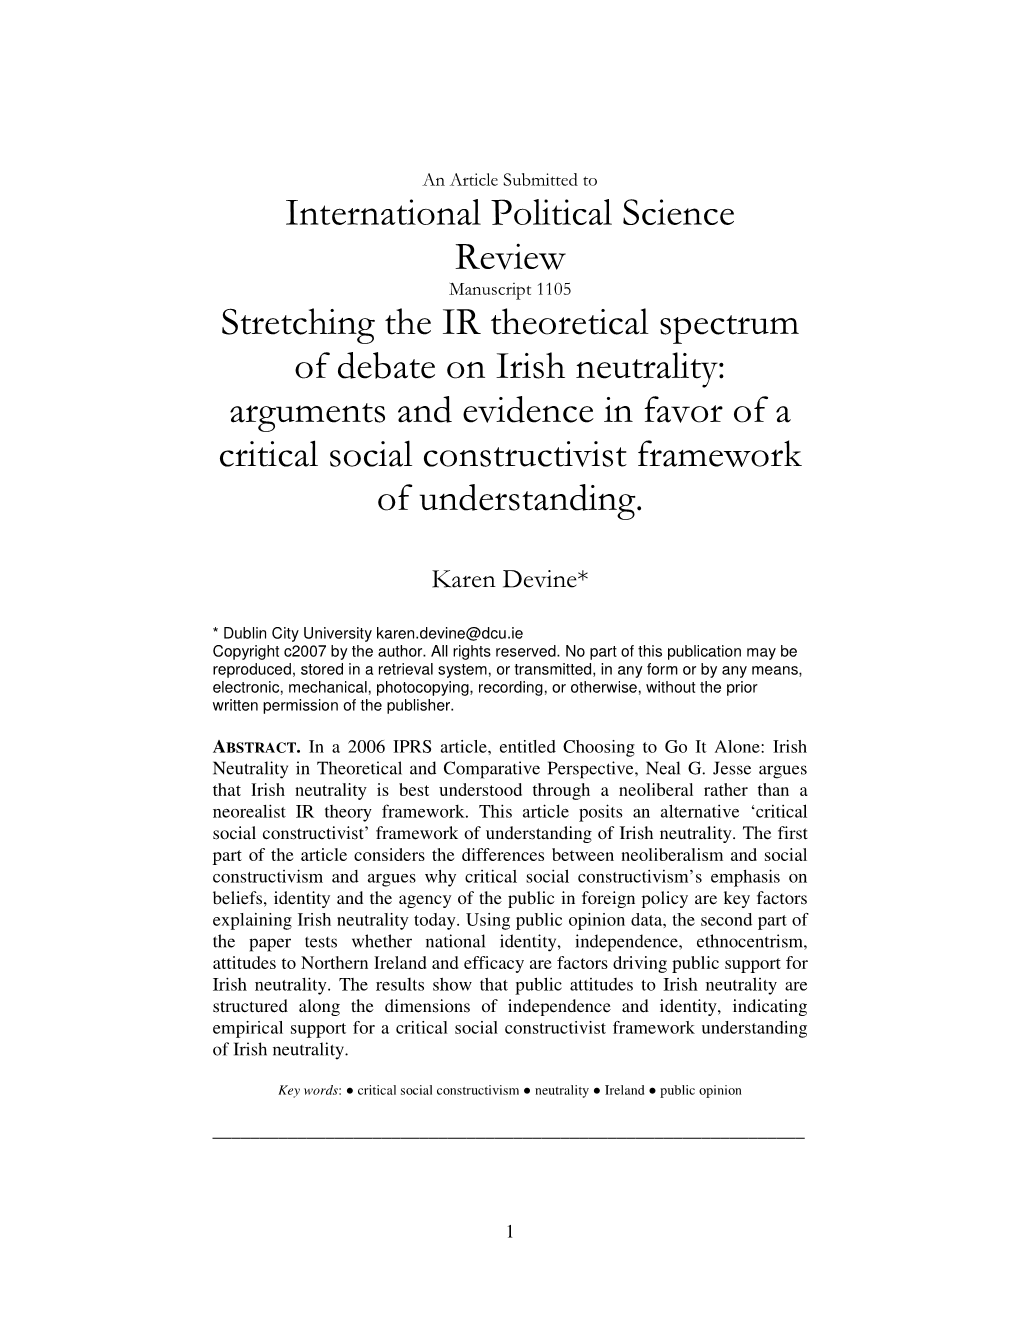 Stretching the IR Theoretical Spectrum of Debate on Irish Neutrality: Arguments and Evidence in Favor of a Critical Social Constructivist Framework of Understanding